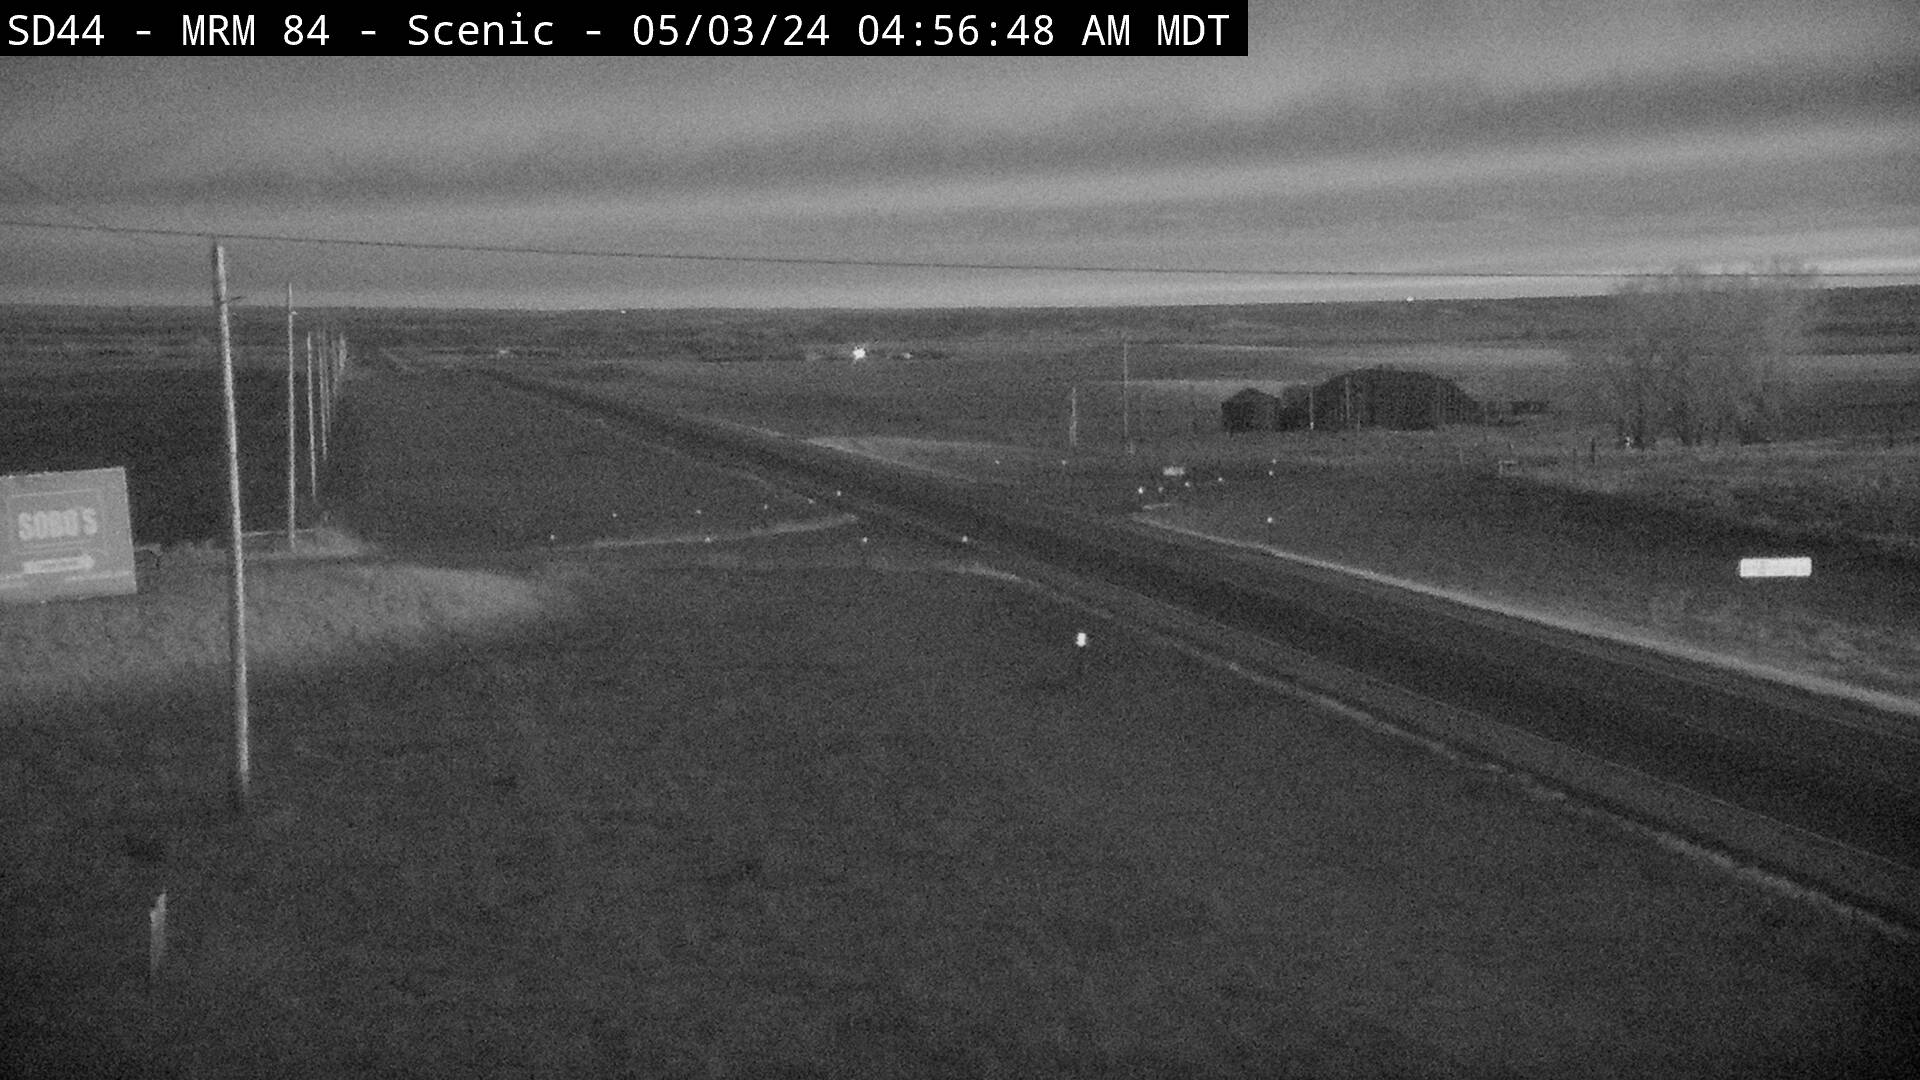 2 miles west of town along SD-44 @ MP 84 - West Traffic Camera